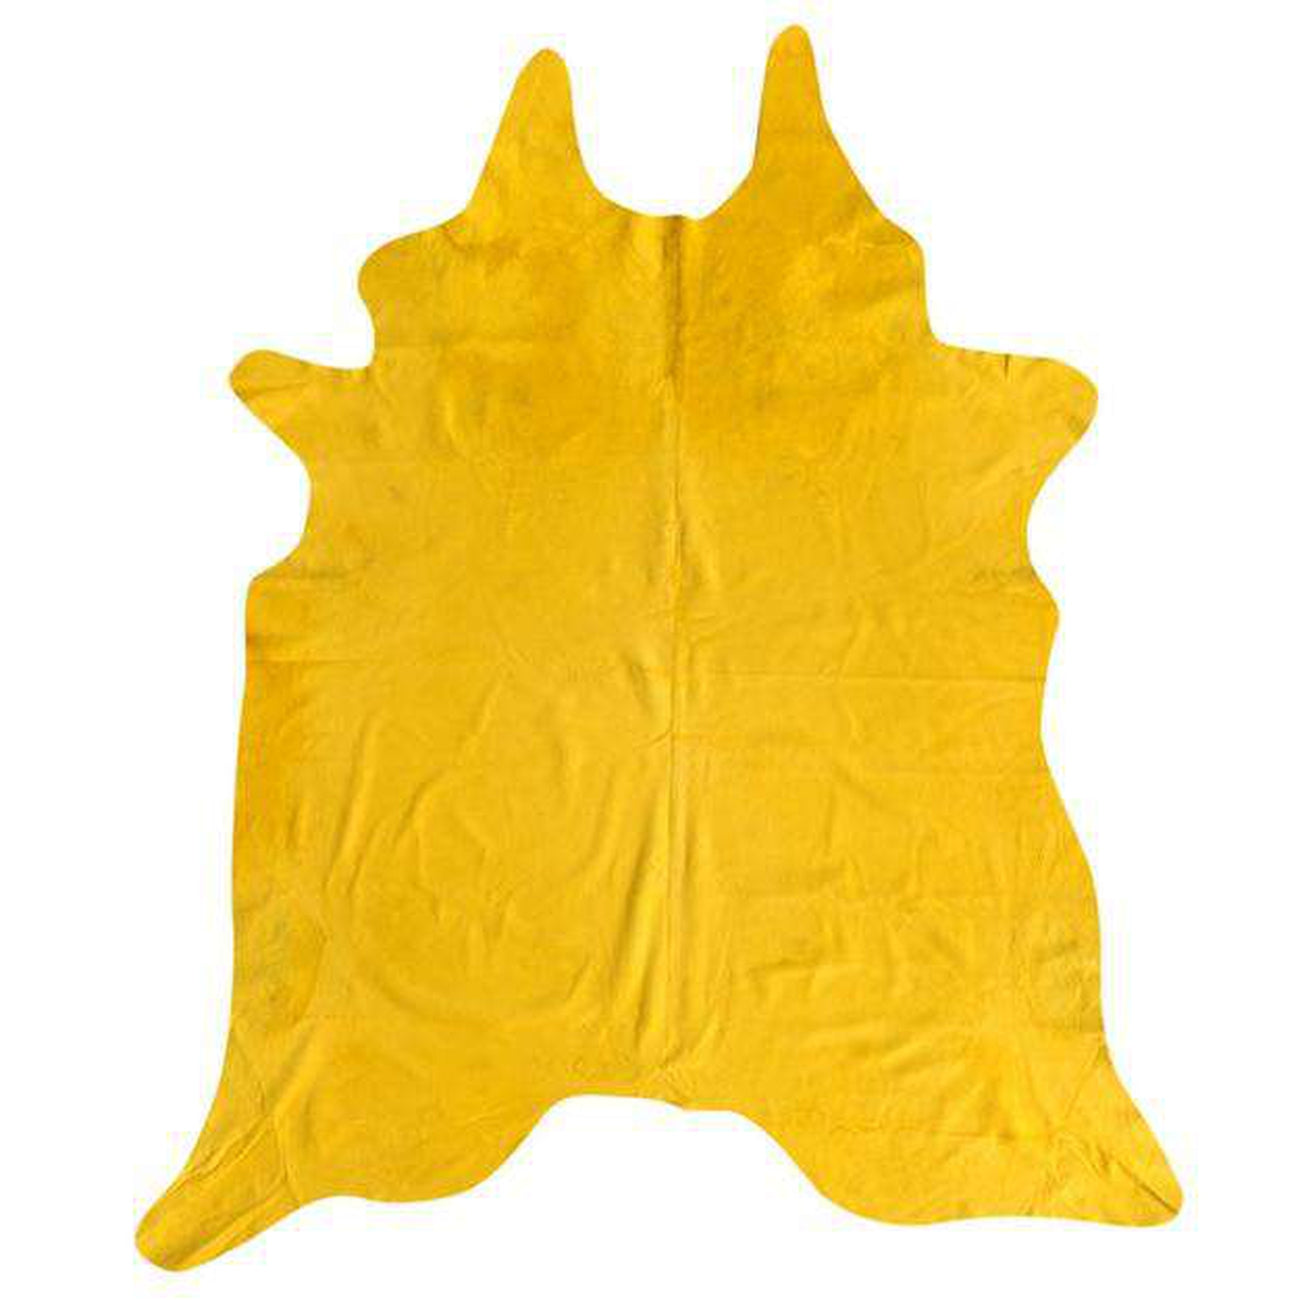 Pergamino, Yellow Dyed Cowhide